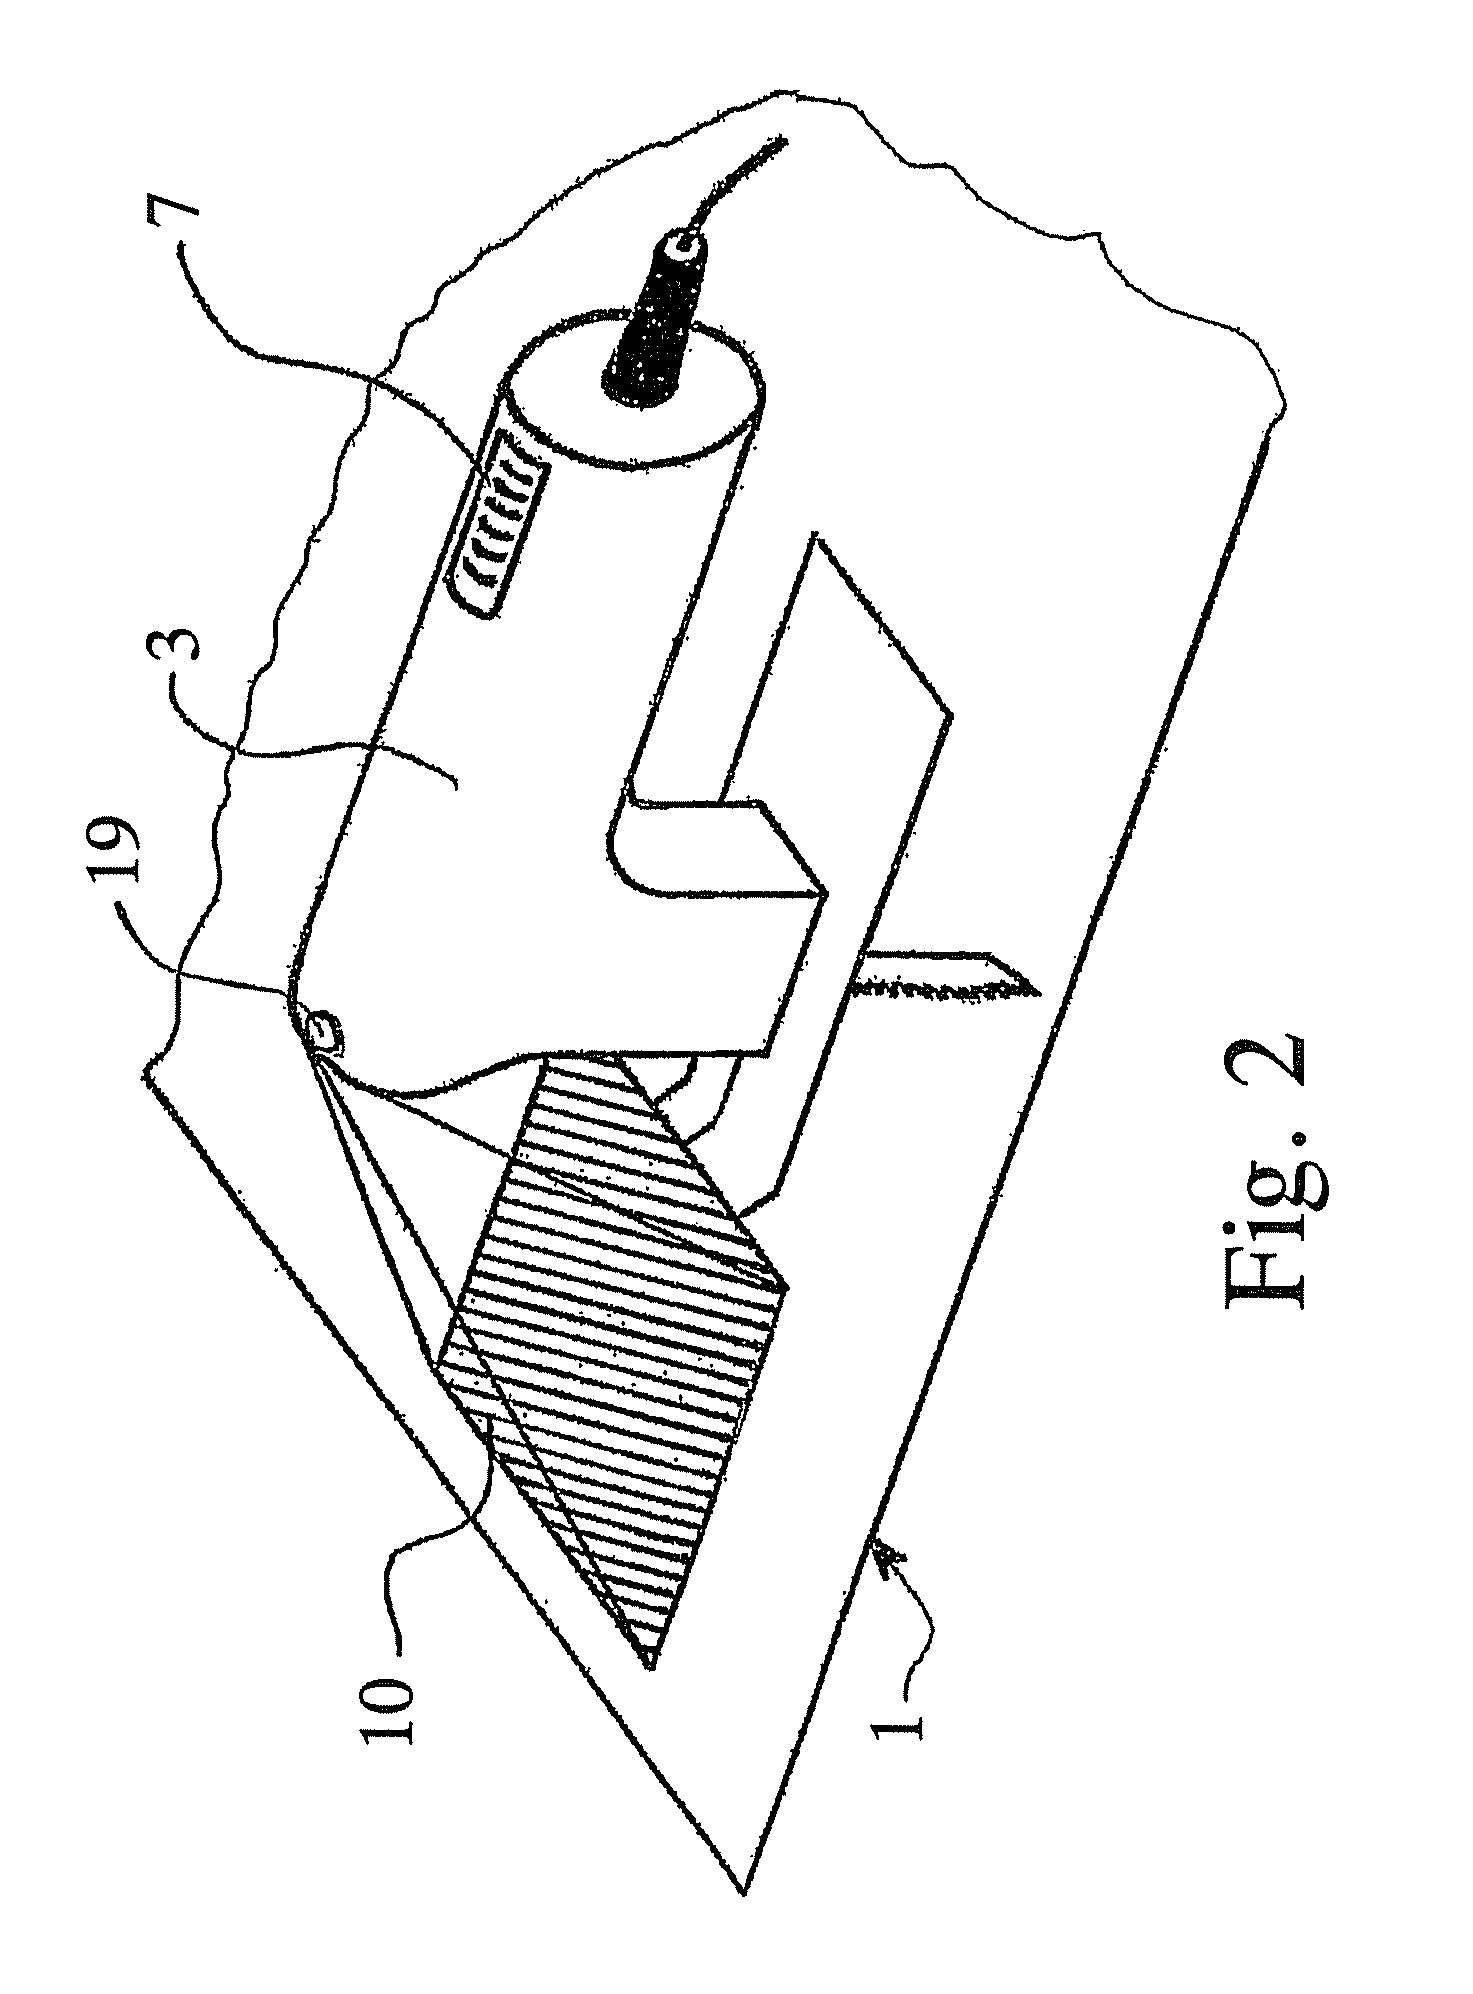 Processing method using an electric tool